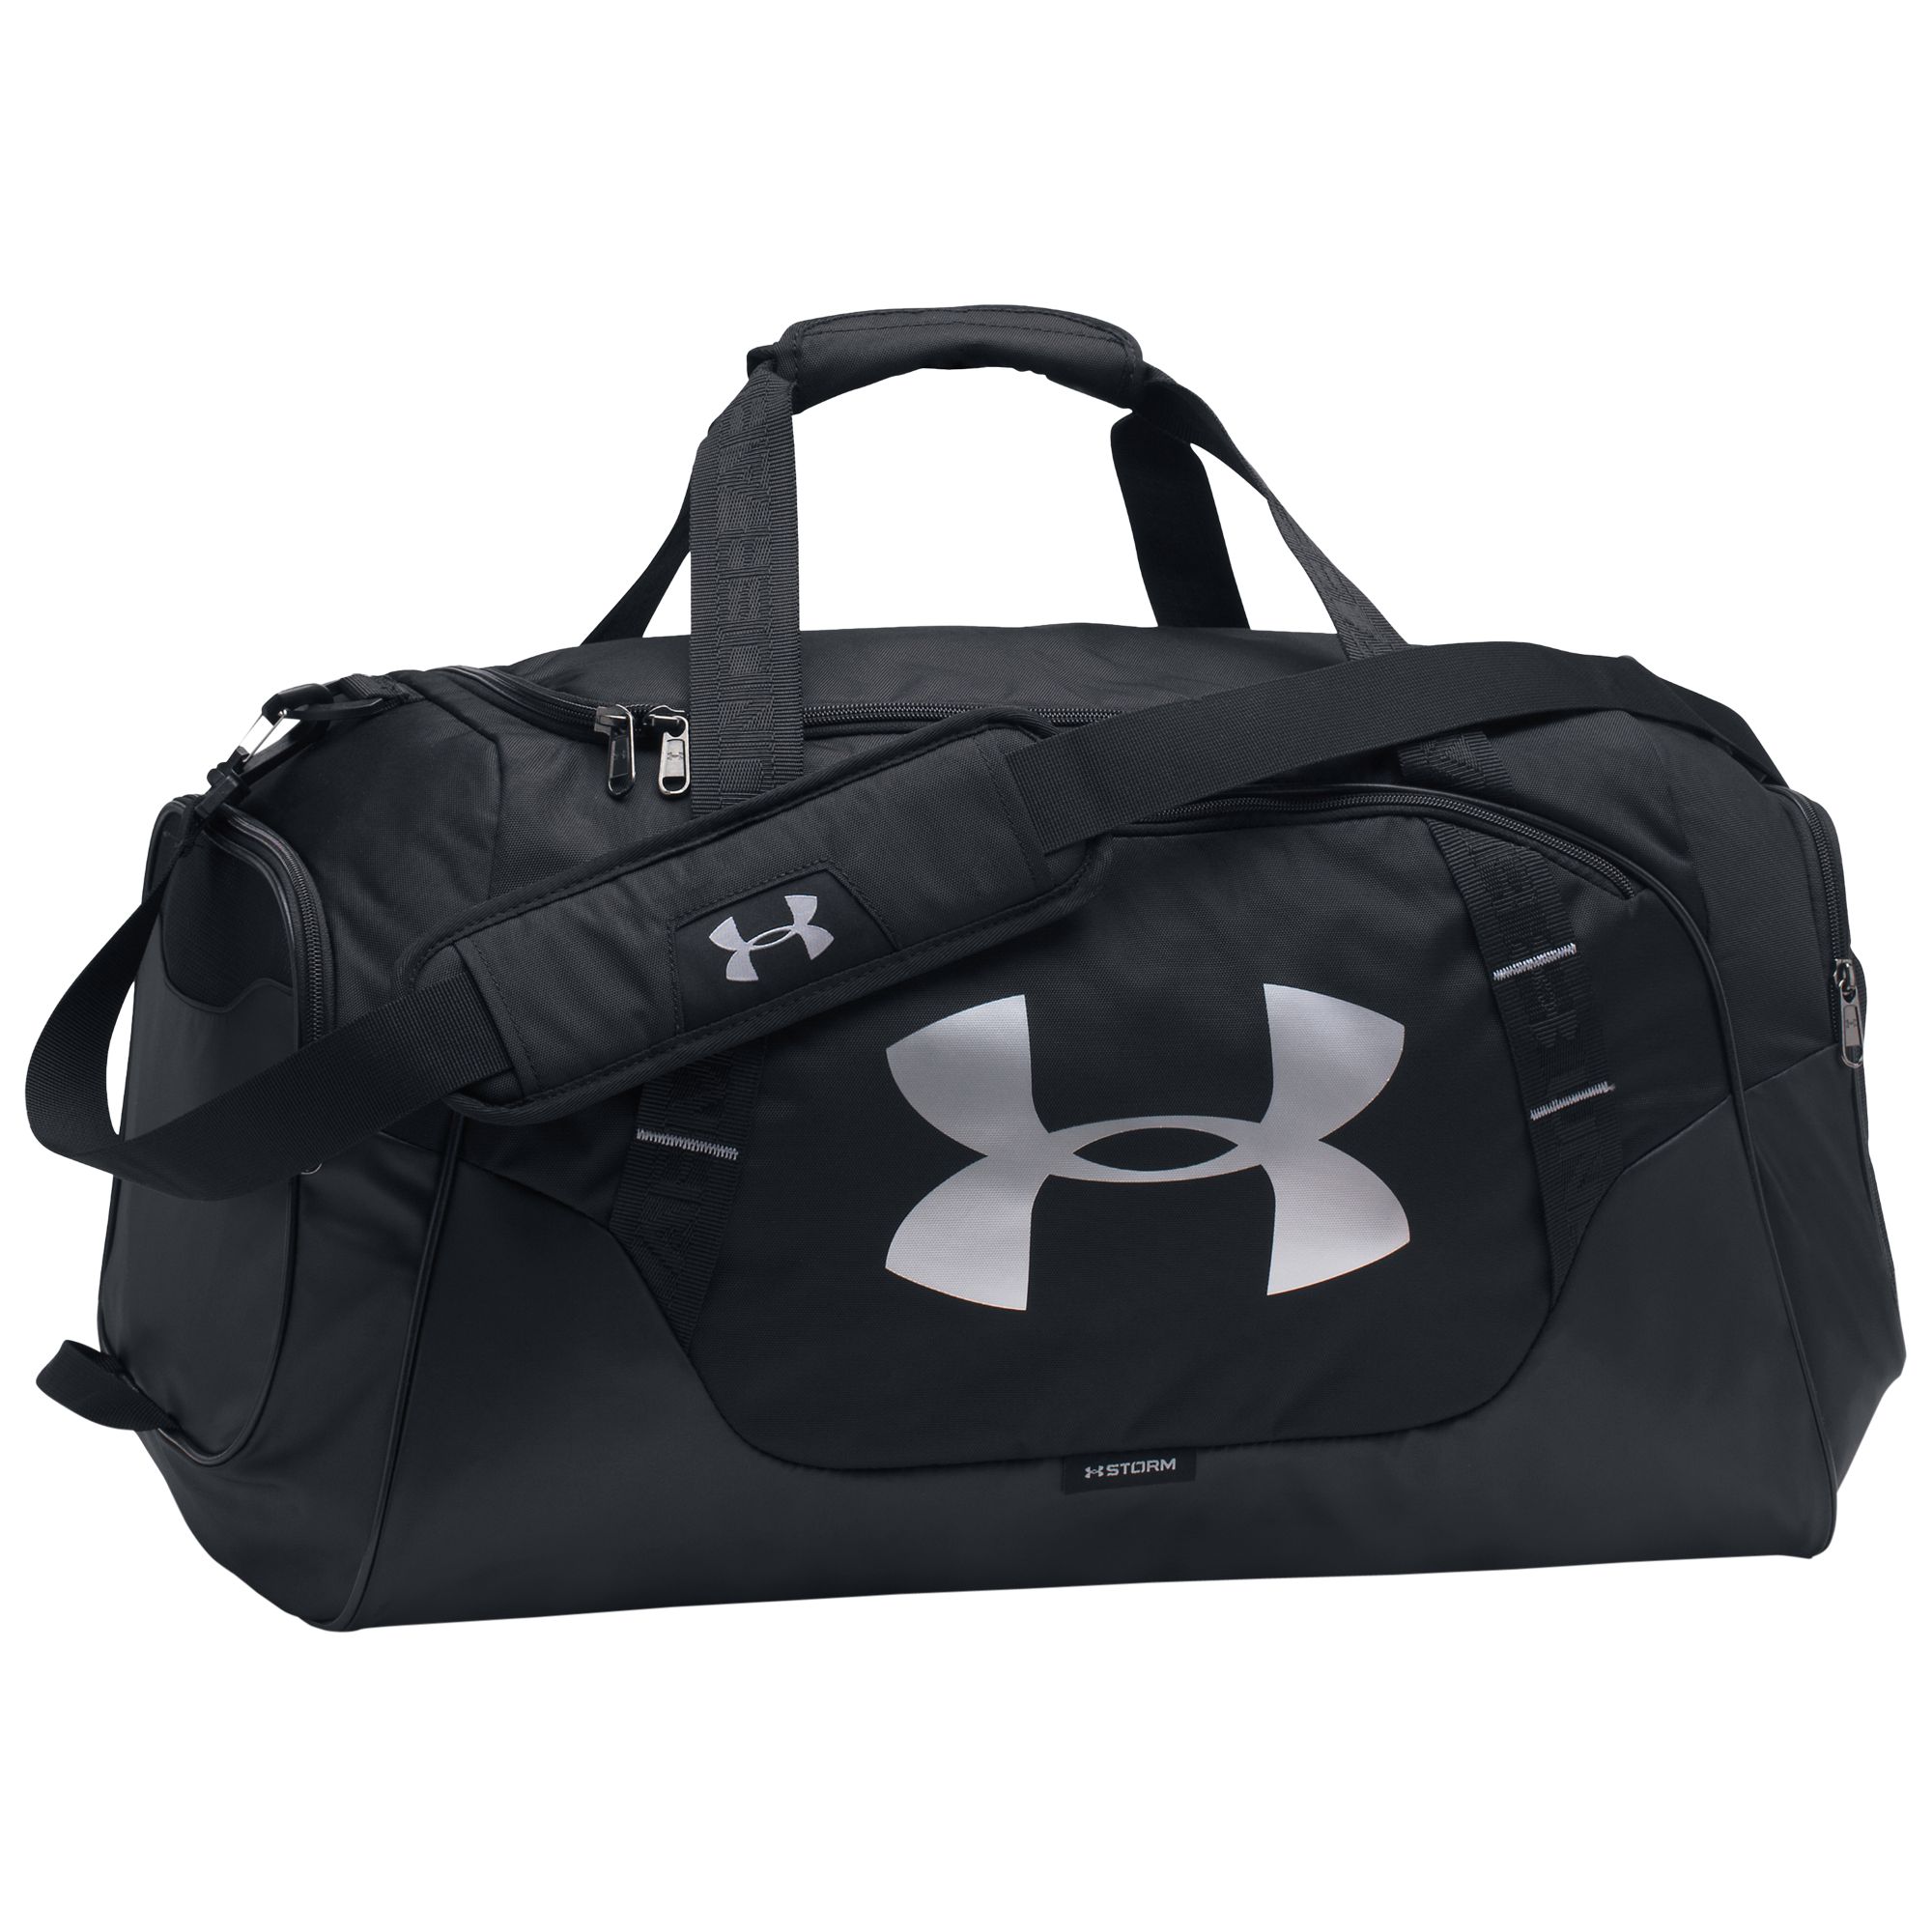 under armour storm duffle